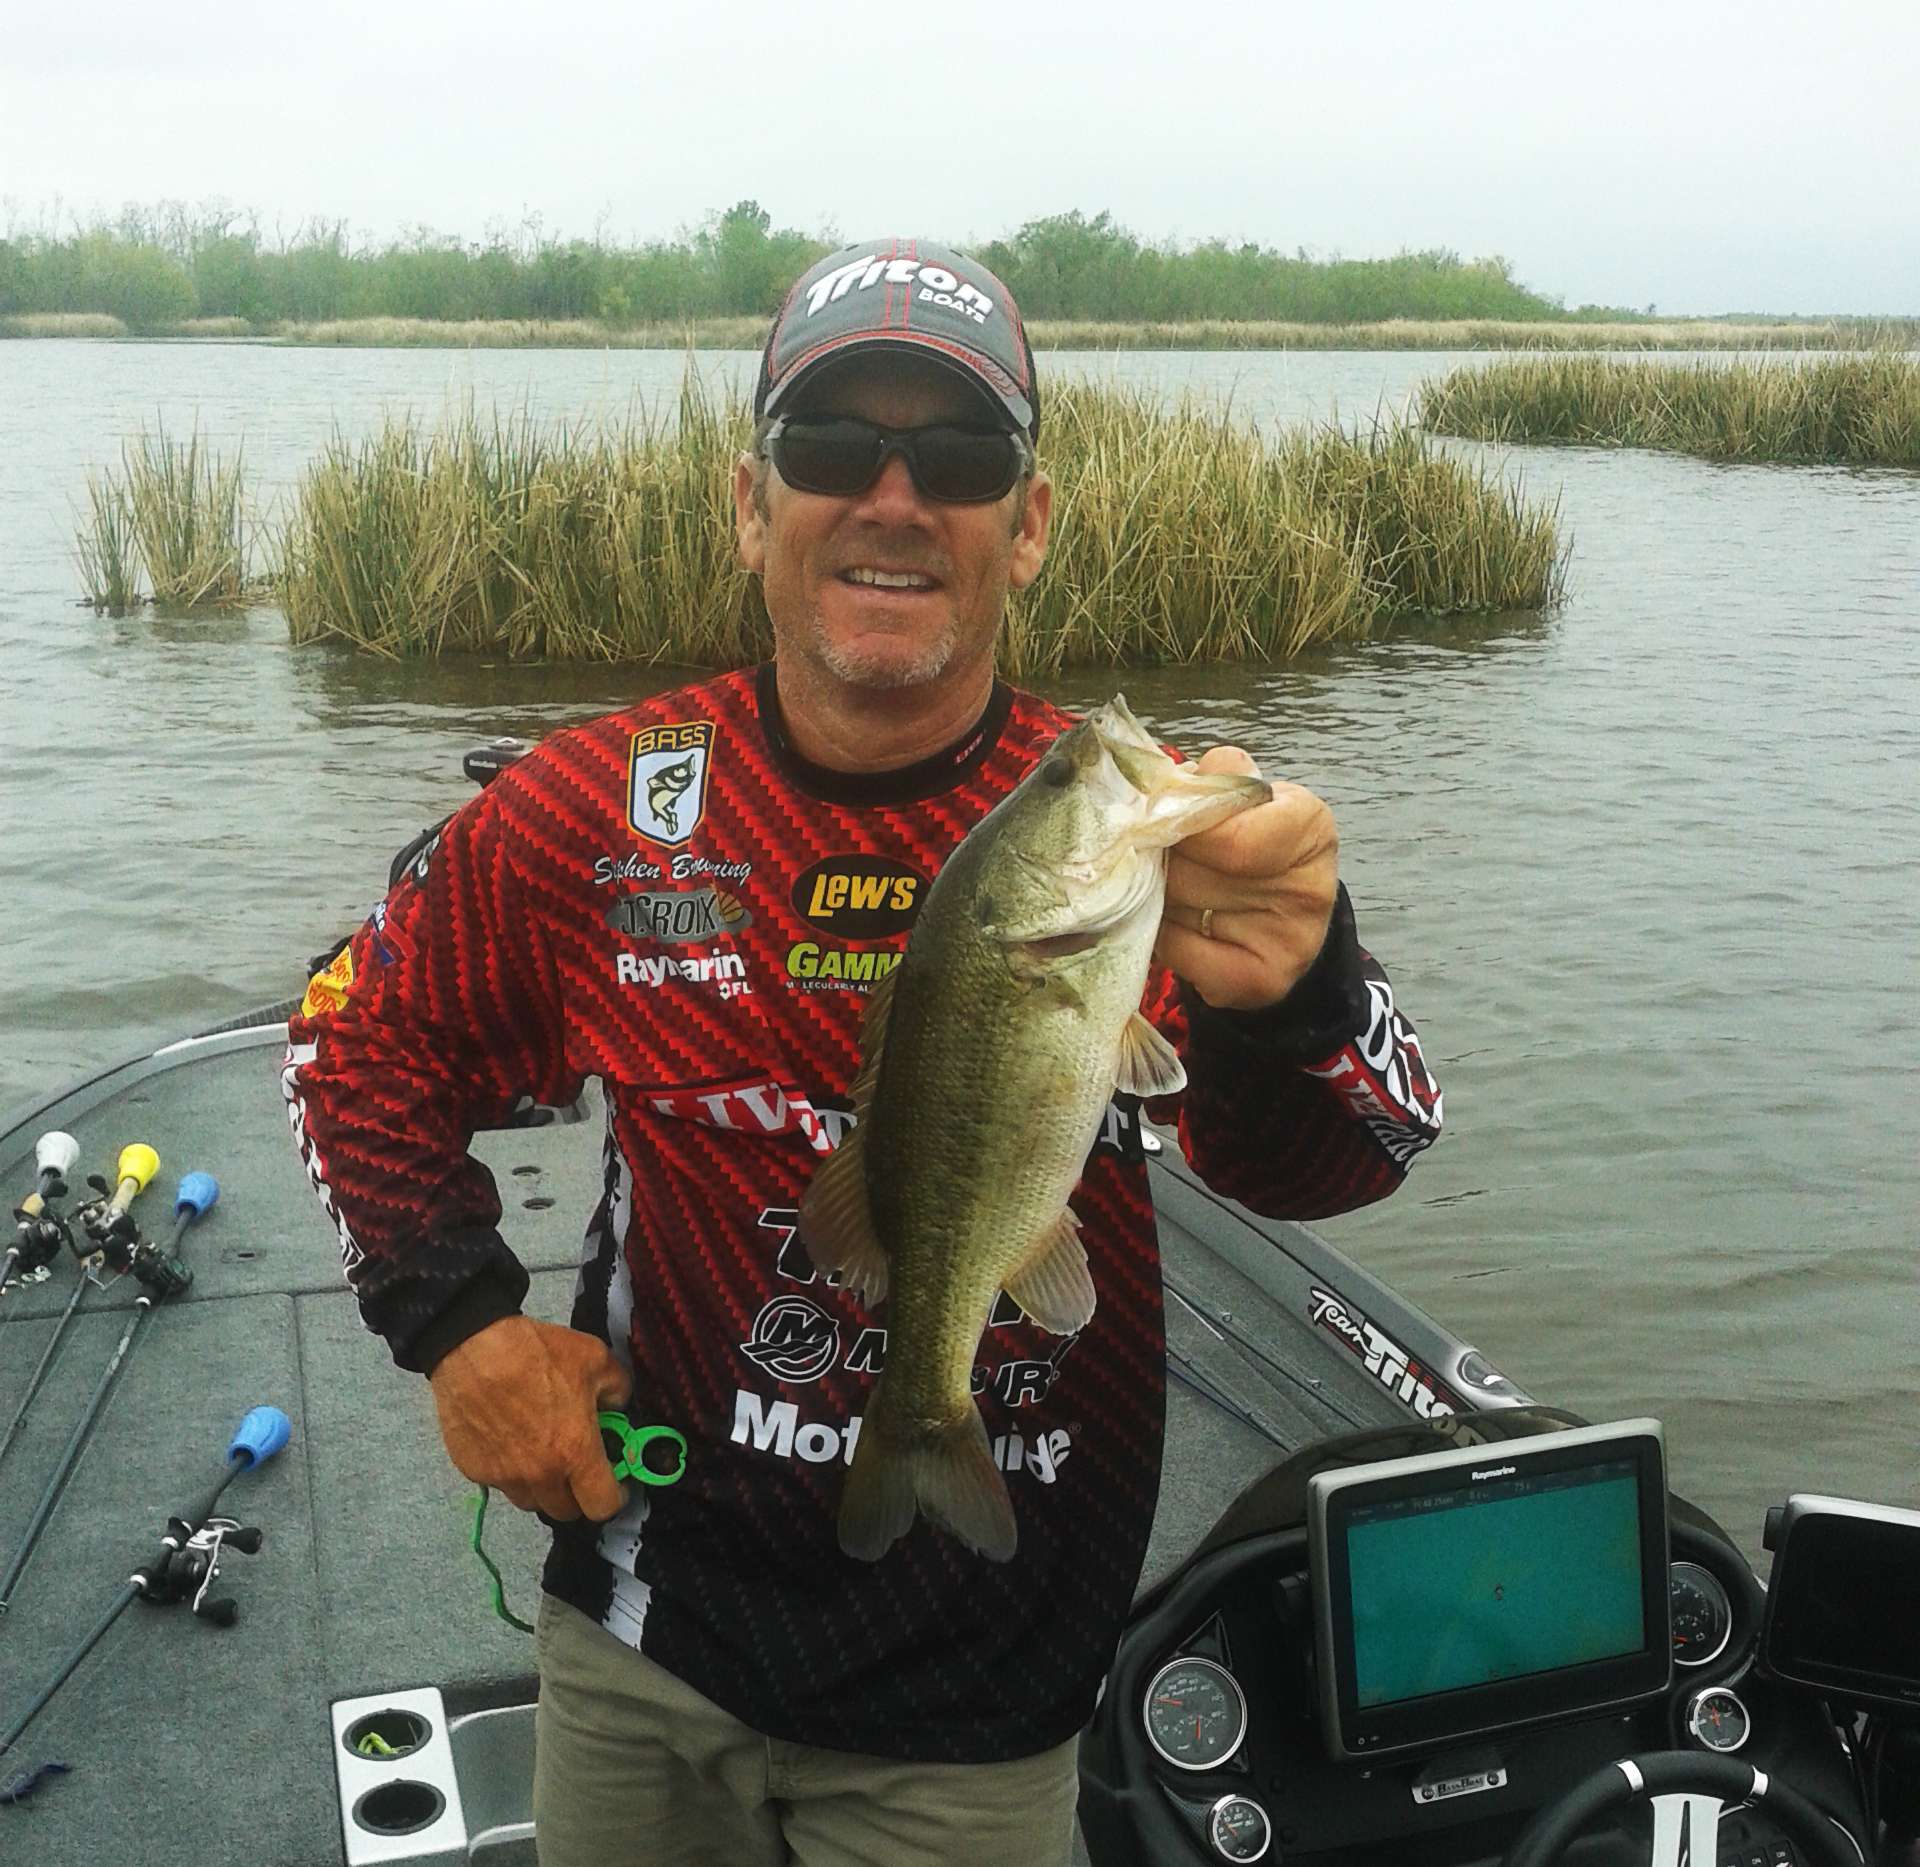 Stephen Browning with his first catch of Day 3.
<br>Photo by Bassmaster Marshal Brian Weatherford